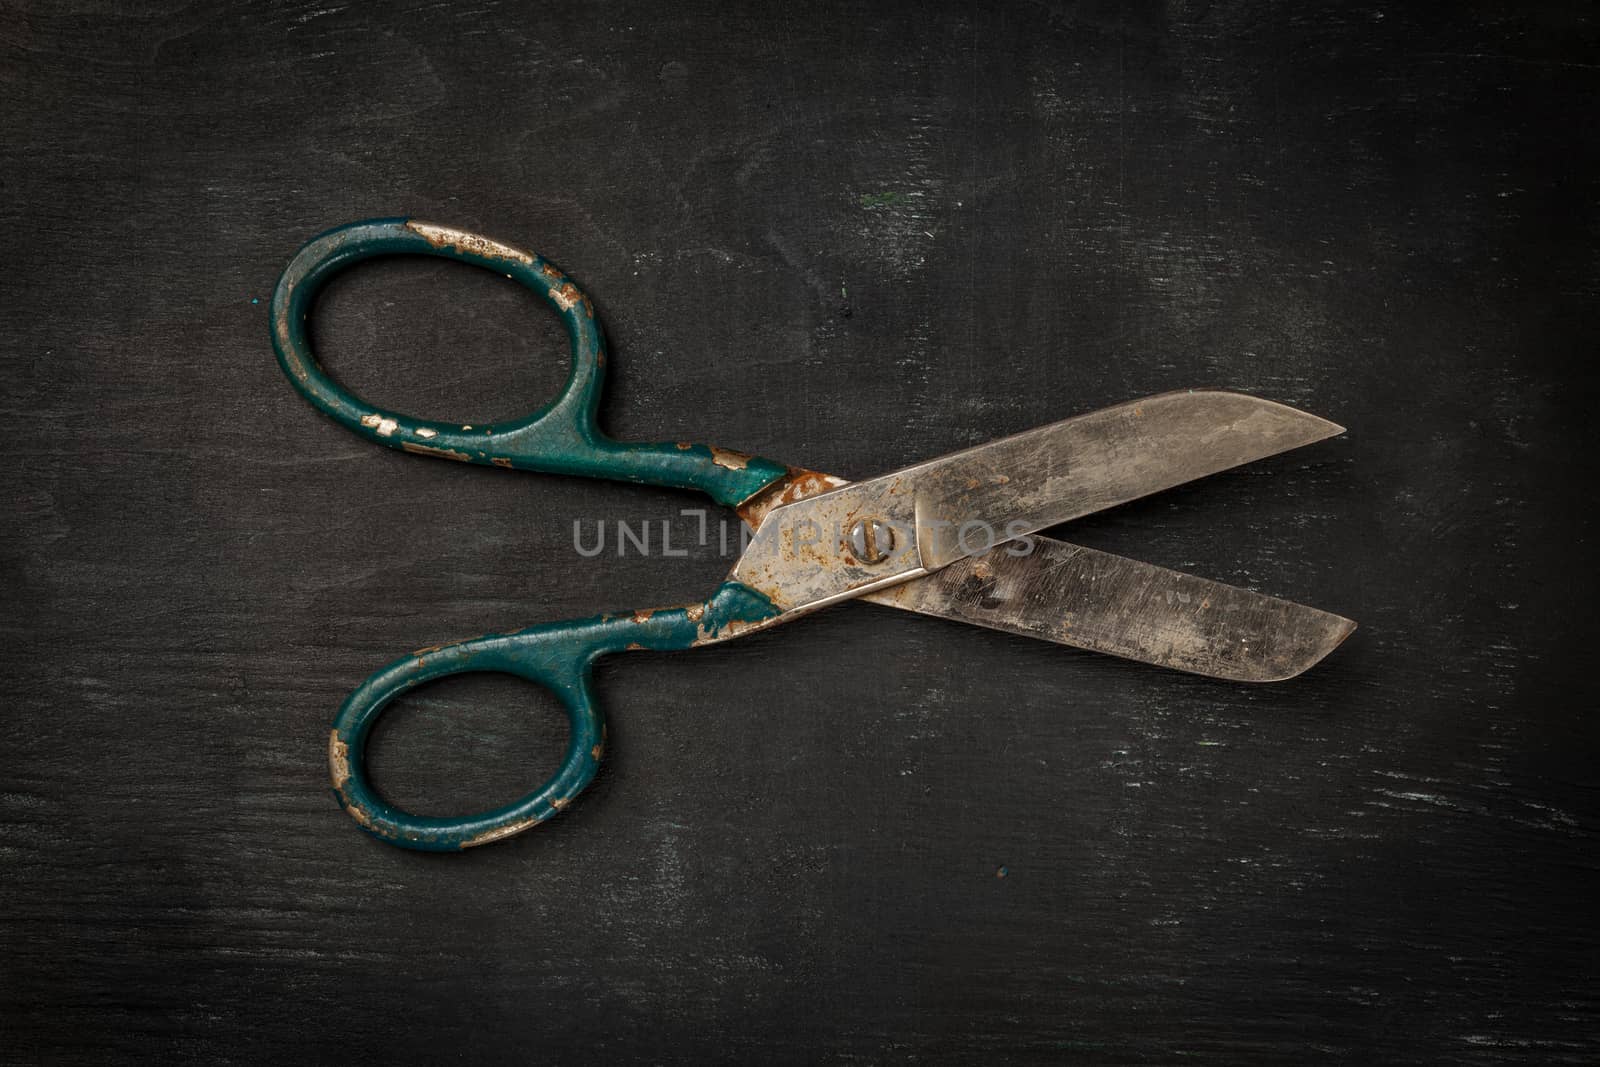 Retro sewing accessories - scissors on black wooden background